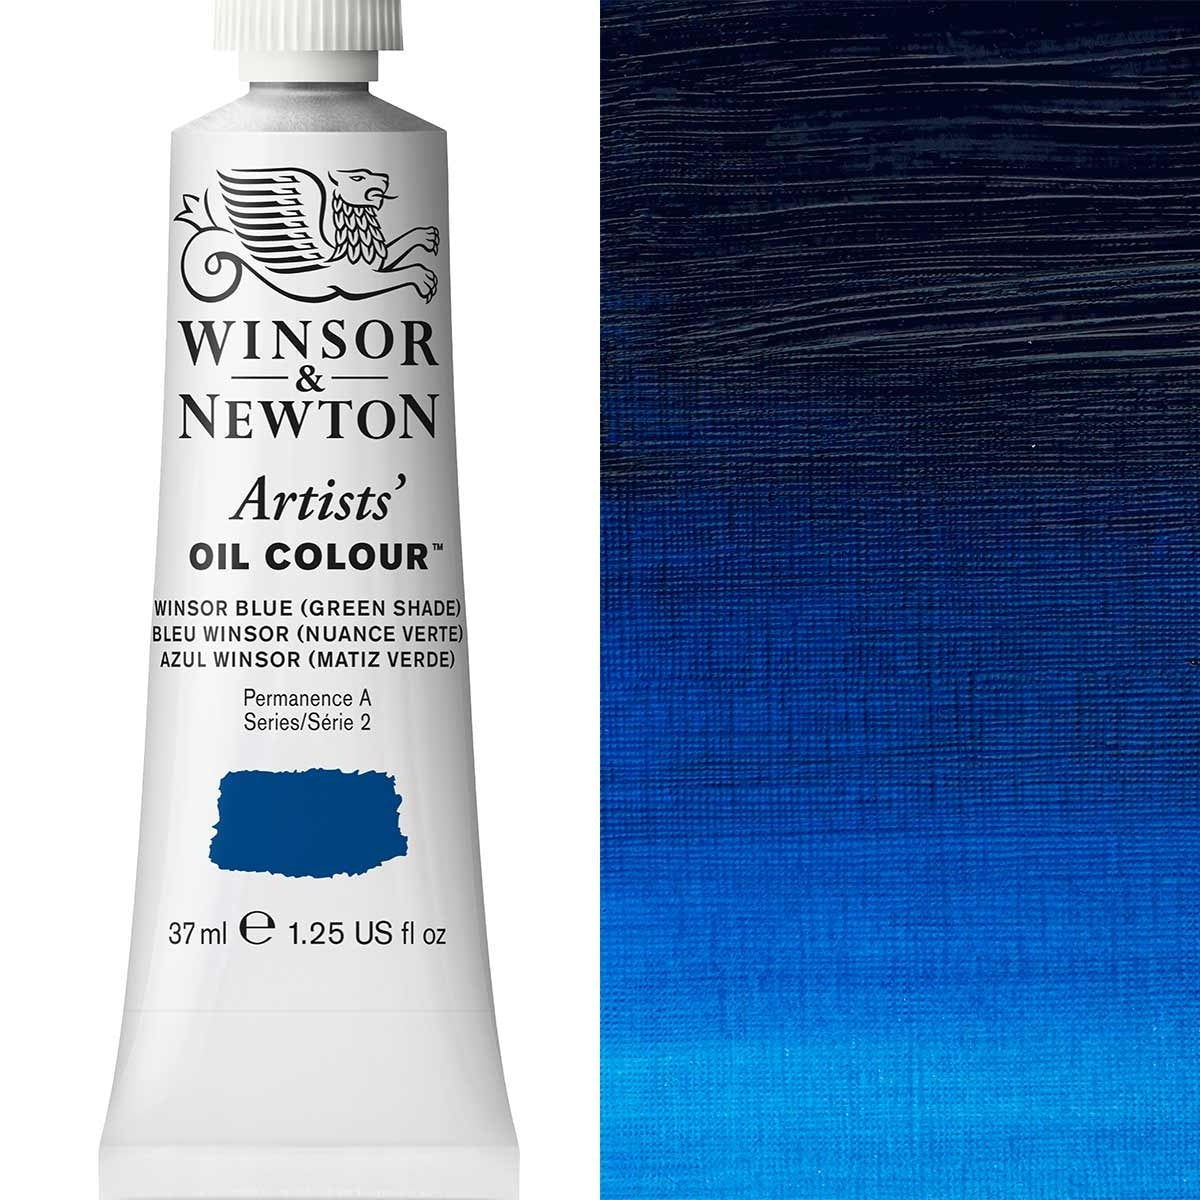 Winsor and Newton - Artists 'Oil Color - 37ml - Winsor Blue Green Shade